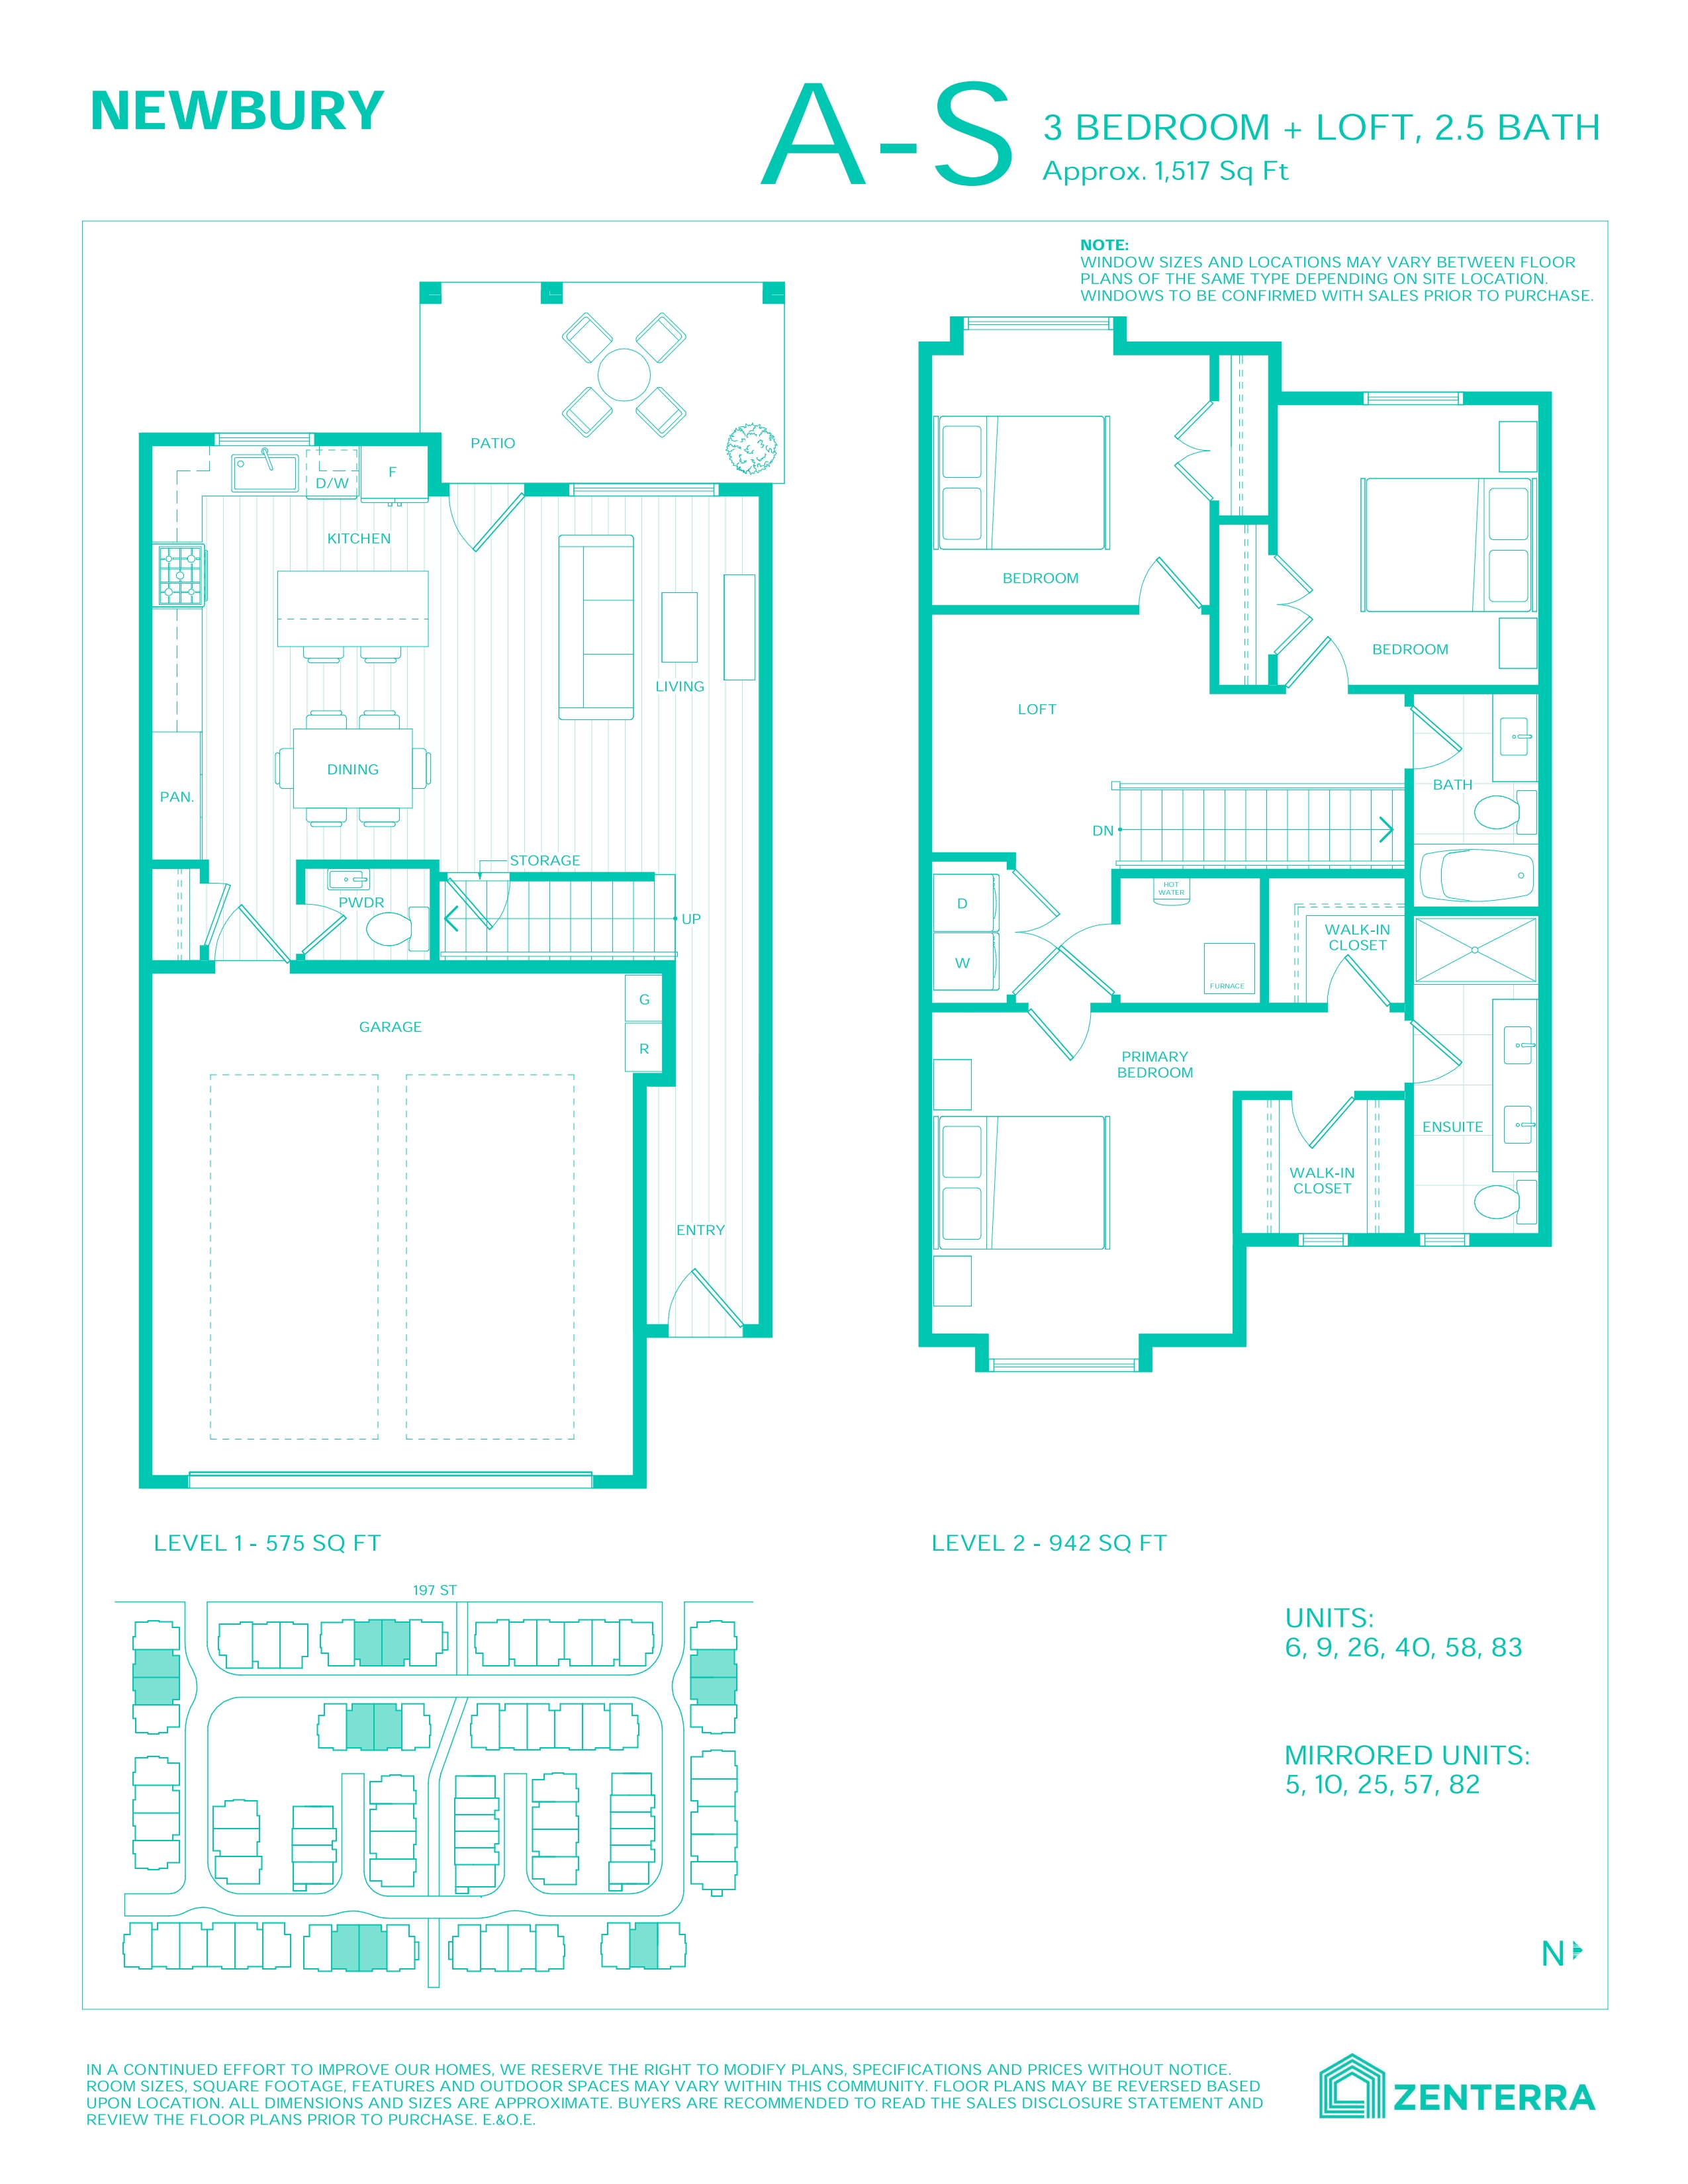  Floor Plan of Newbury Towns with undefined beds